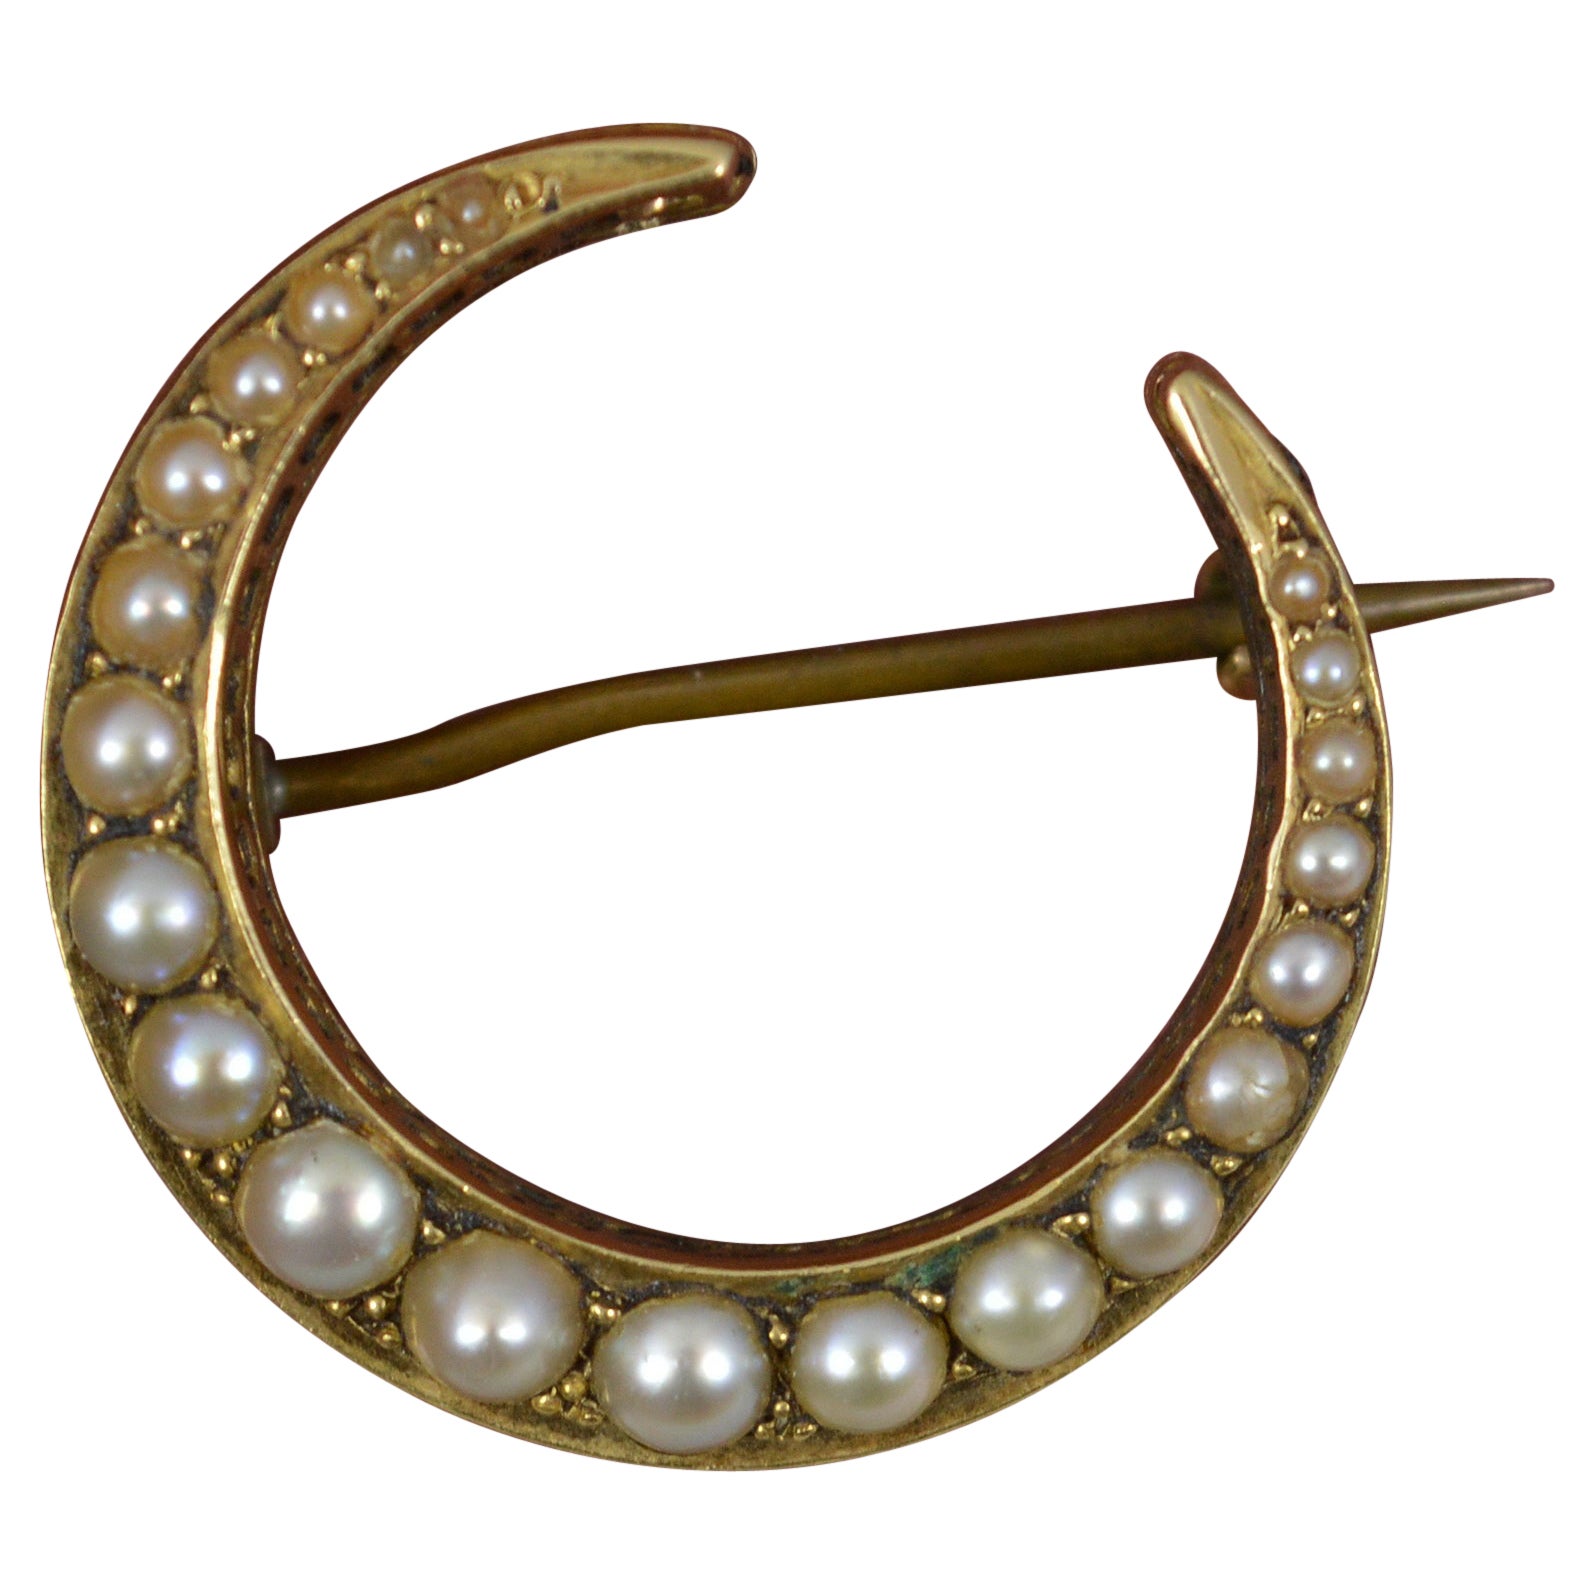 Victorian 15 Carat Gold and Pearl Crescent Brooch